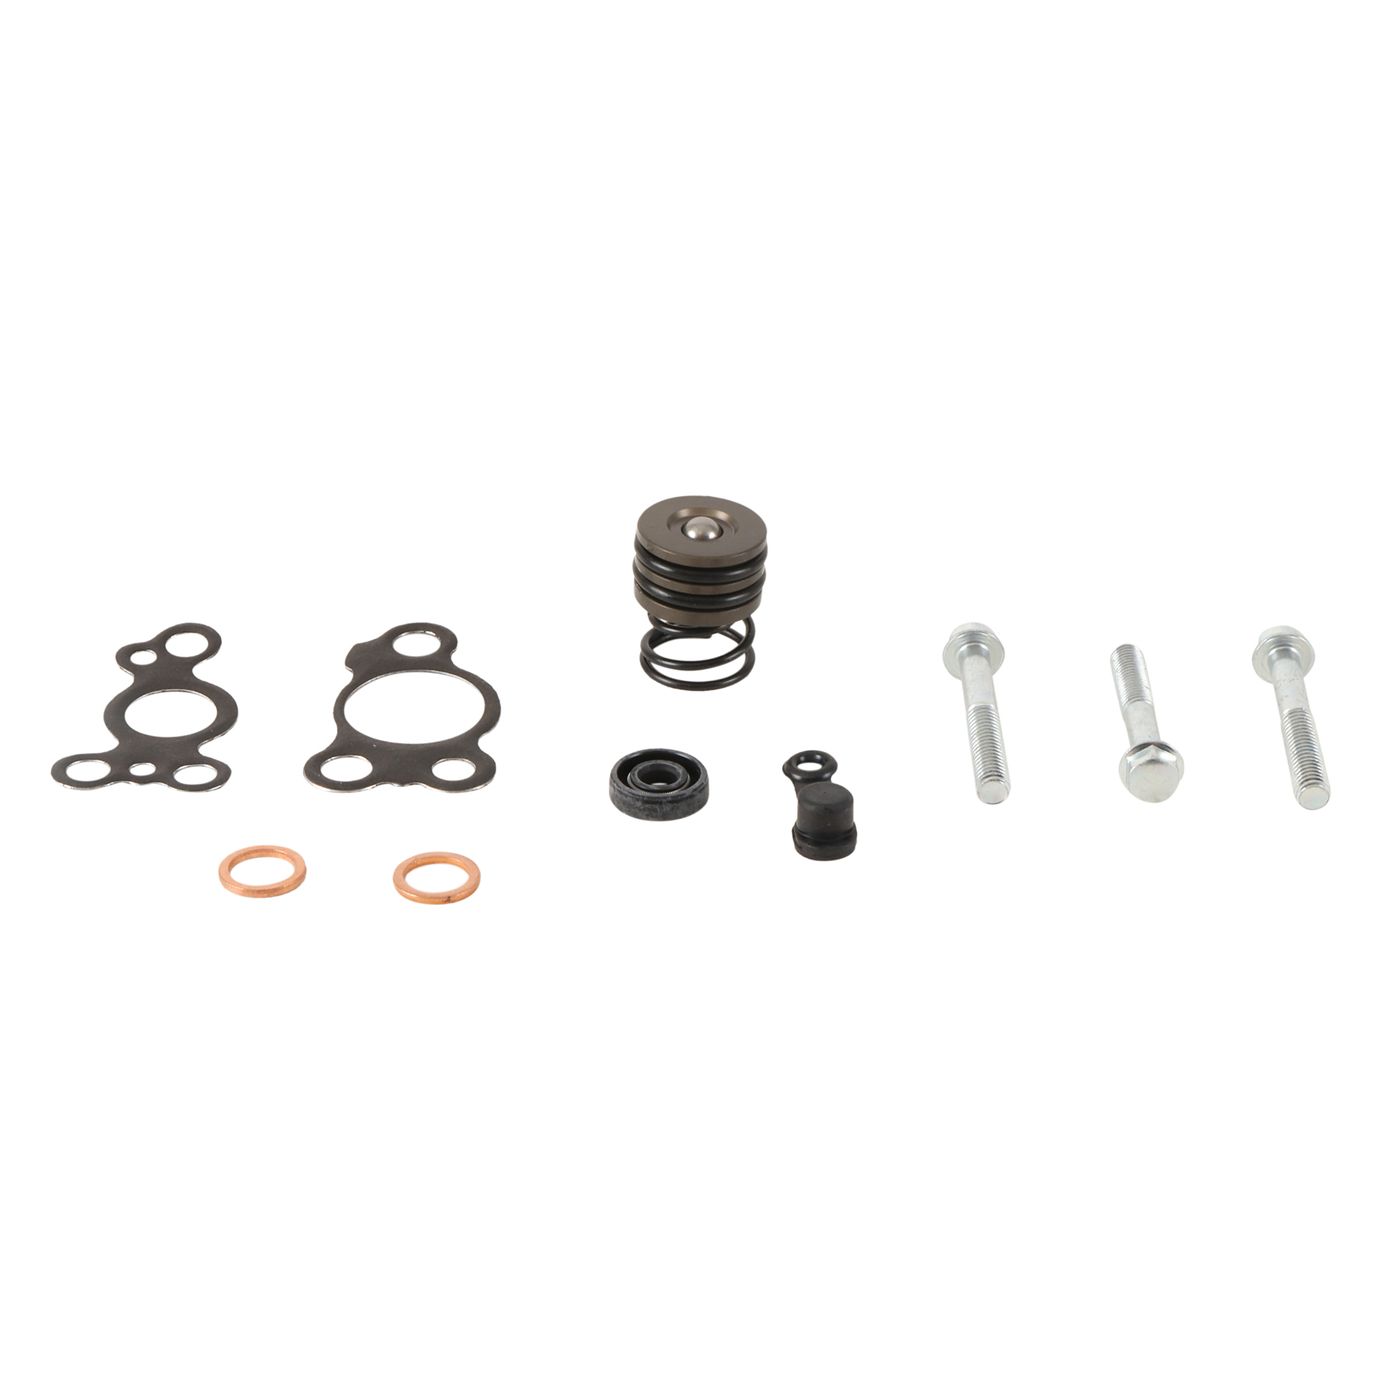 Wrp Clutch Slave Cylinder Kits - WRP186016 image